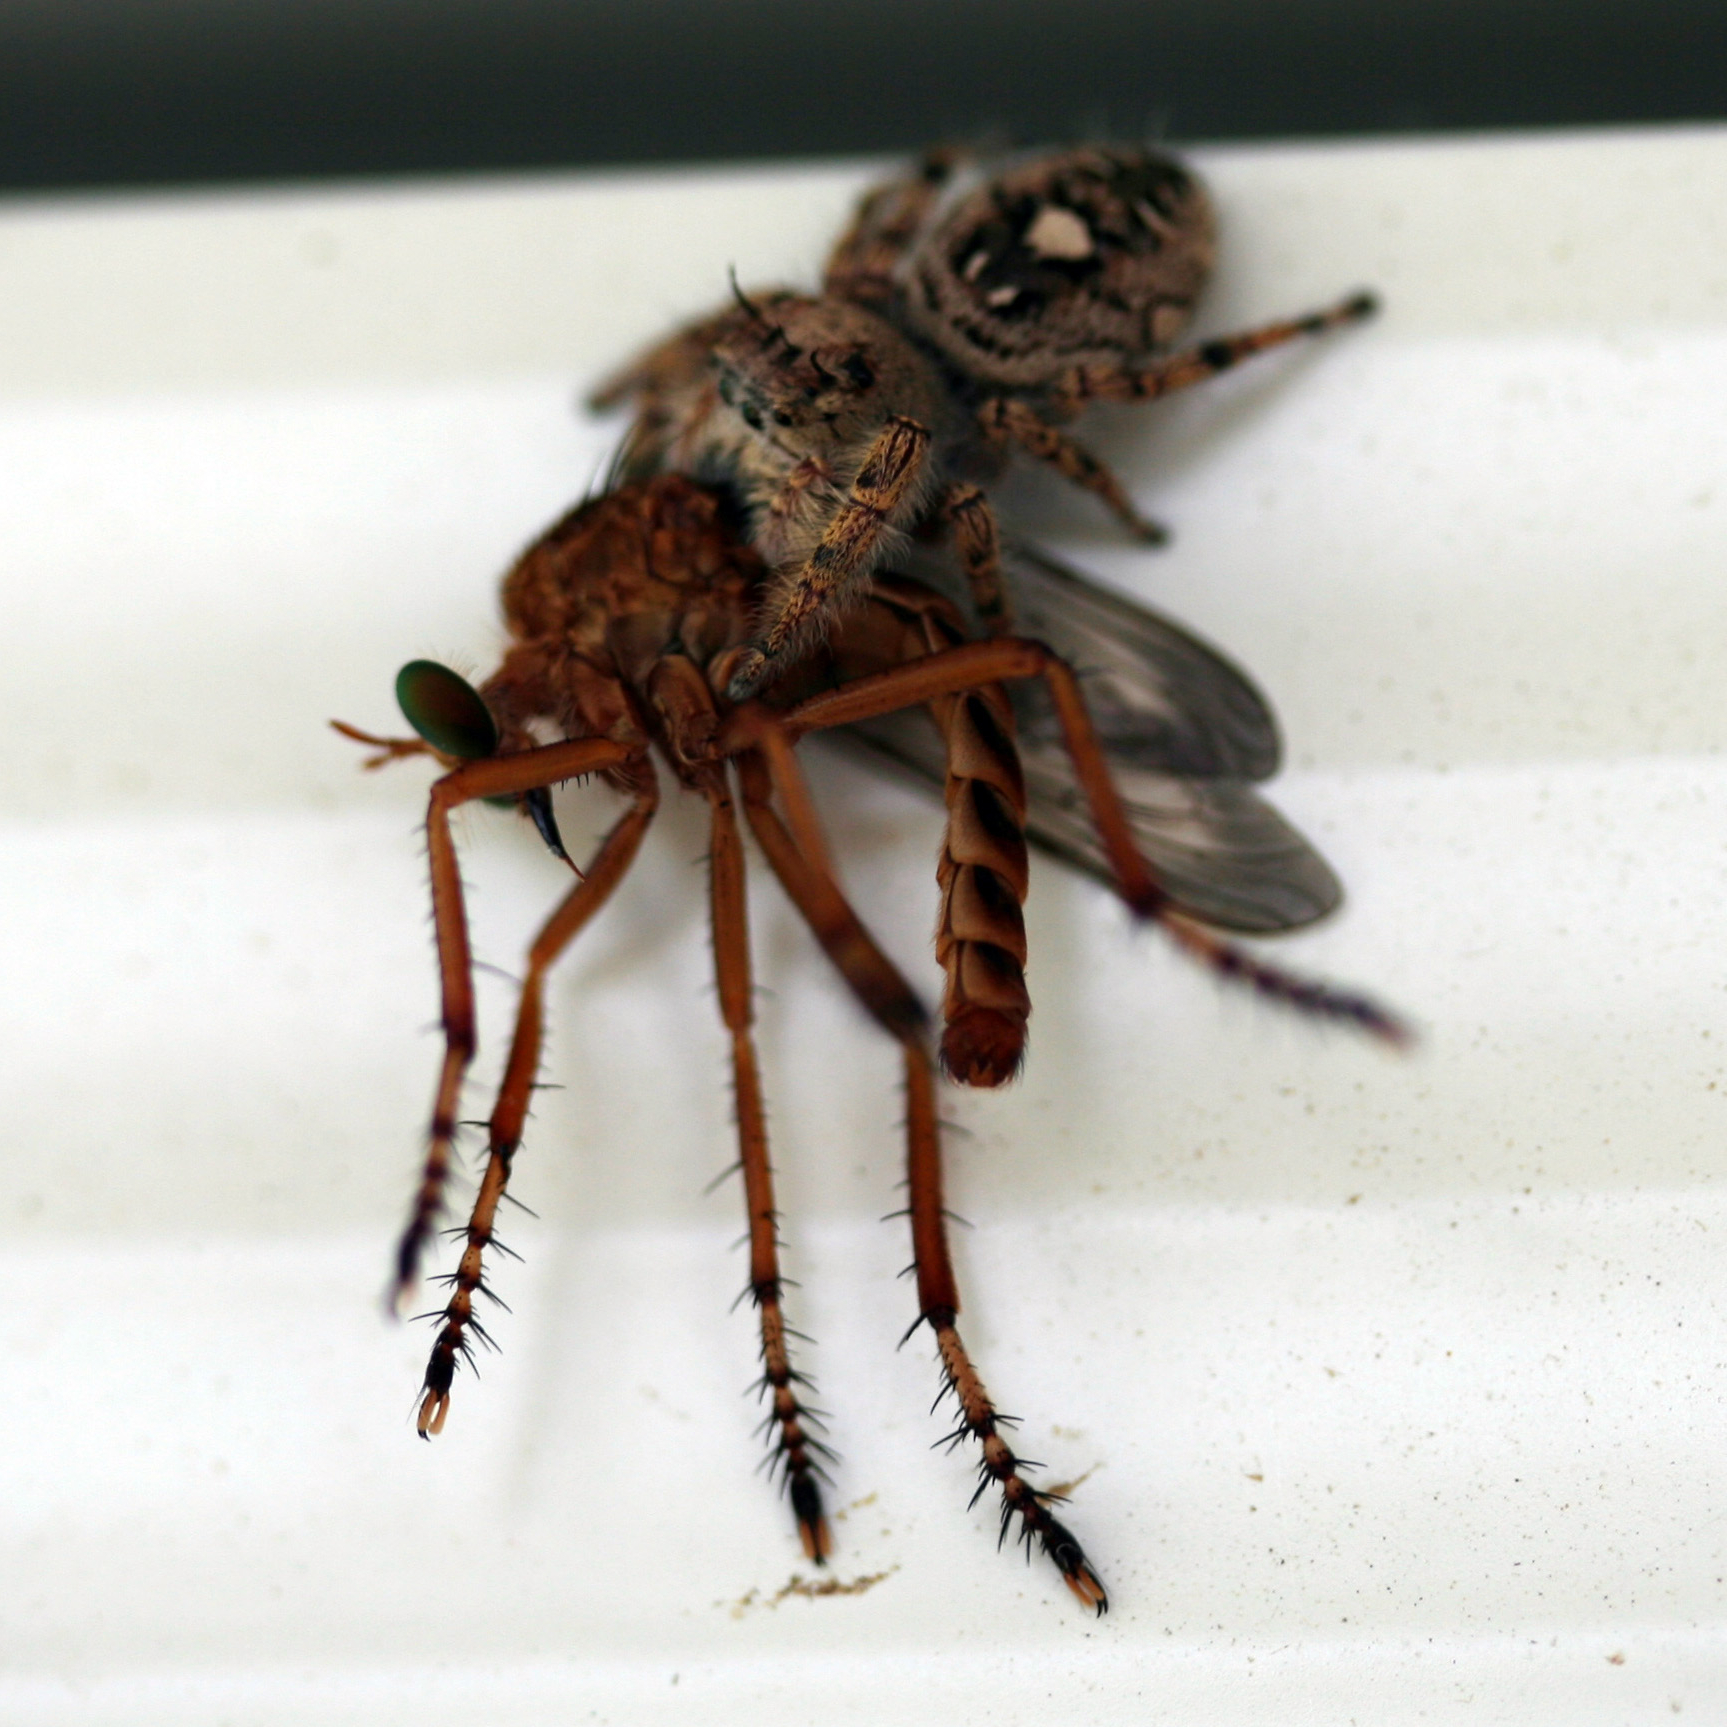 Jumping spider and mosquito